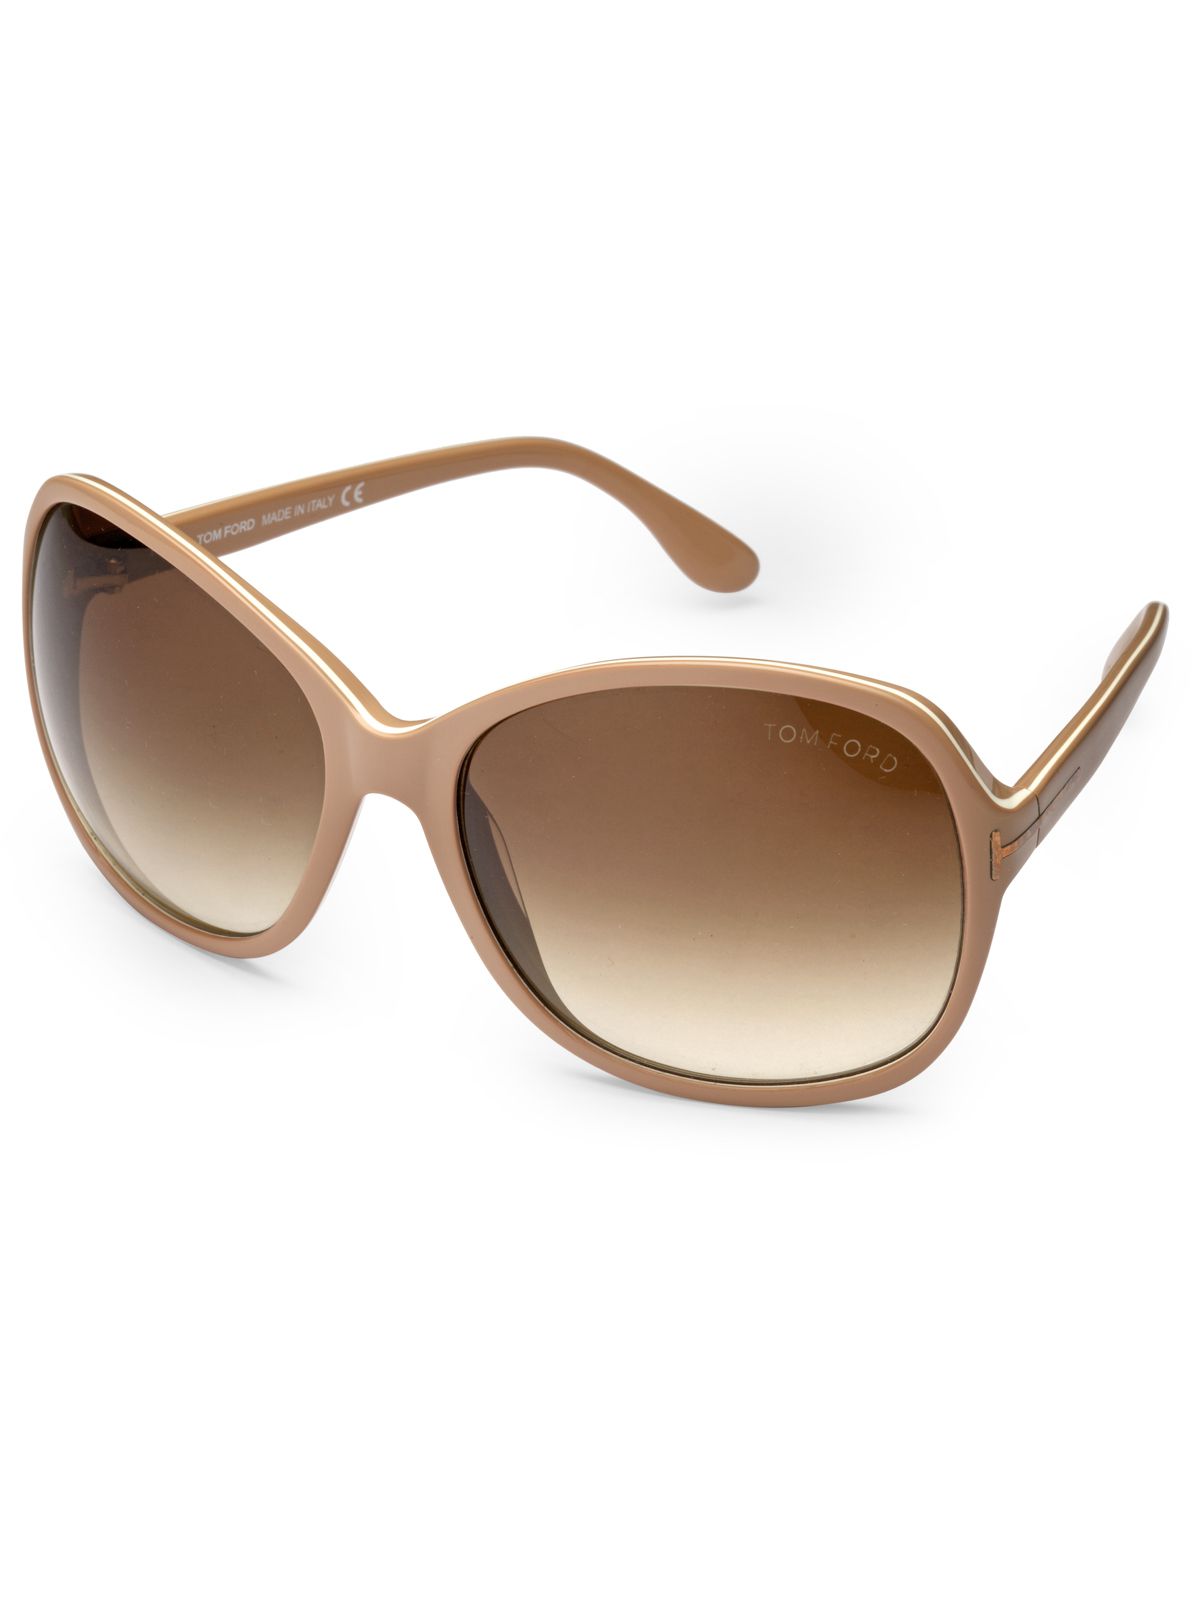 Tom Ford Brown Oversized Sunglasses ( SHEILA 186 59F|62 ) - Buy Tom Ford  Brown Oversized Sunglasses ( SHEILA 186 59F|62 ) Online at Low Price -  Snapdeal